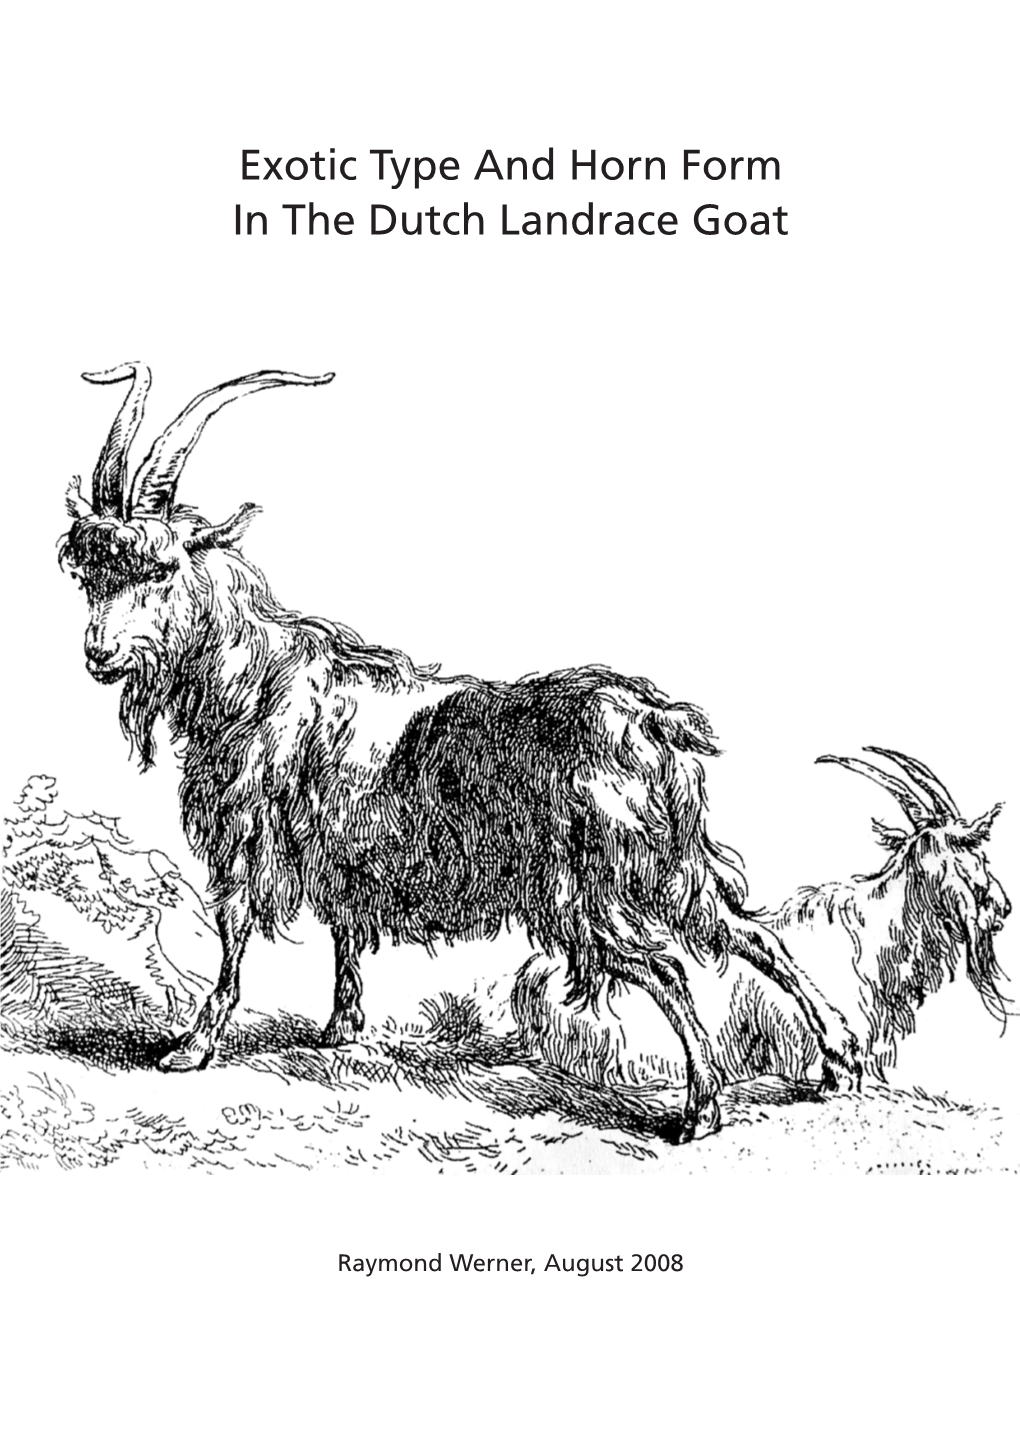 Exotic Type and Horn Form in the Dutch Landrace Goat